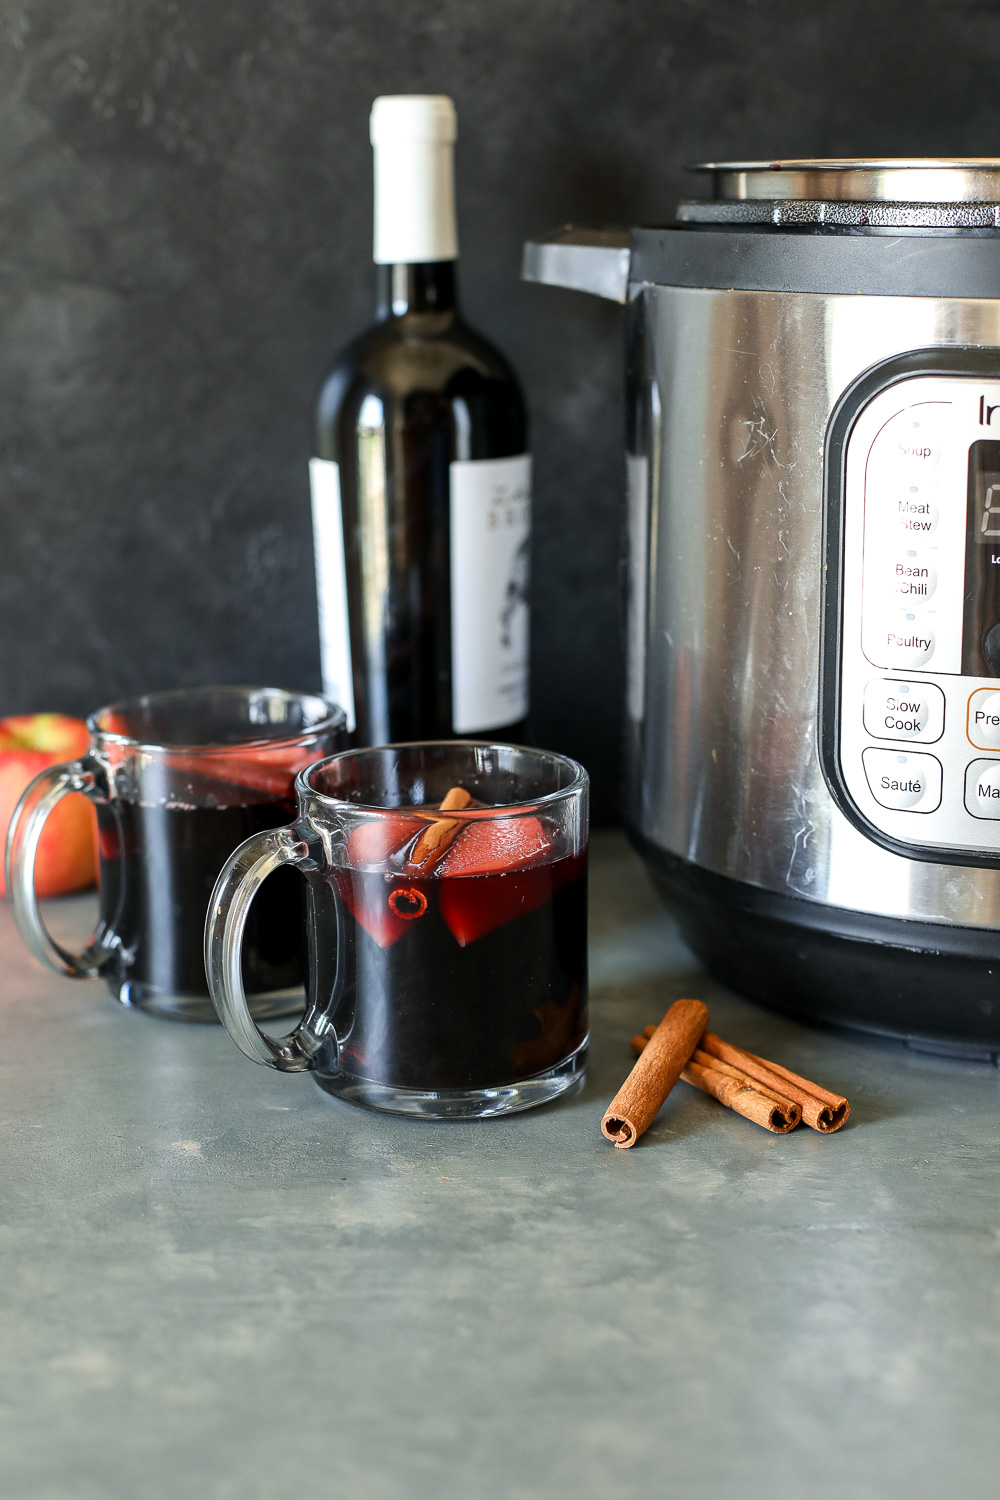 This Instant Pot Mulled Wine is super easy to make and great for the holidays!